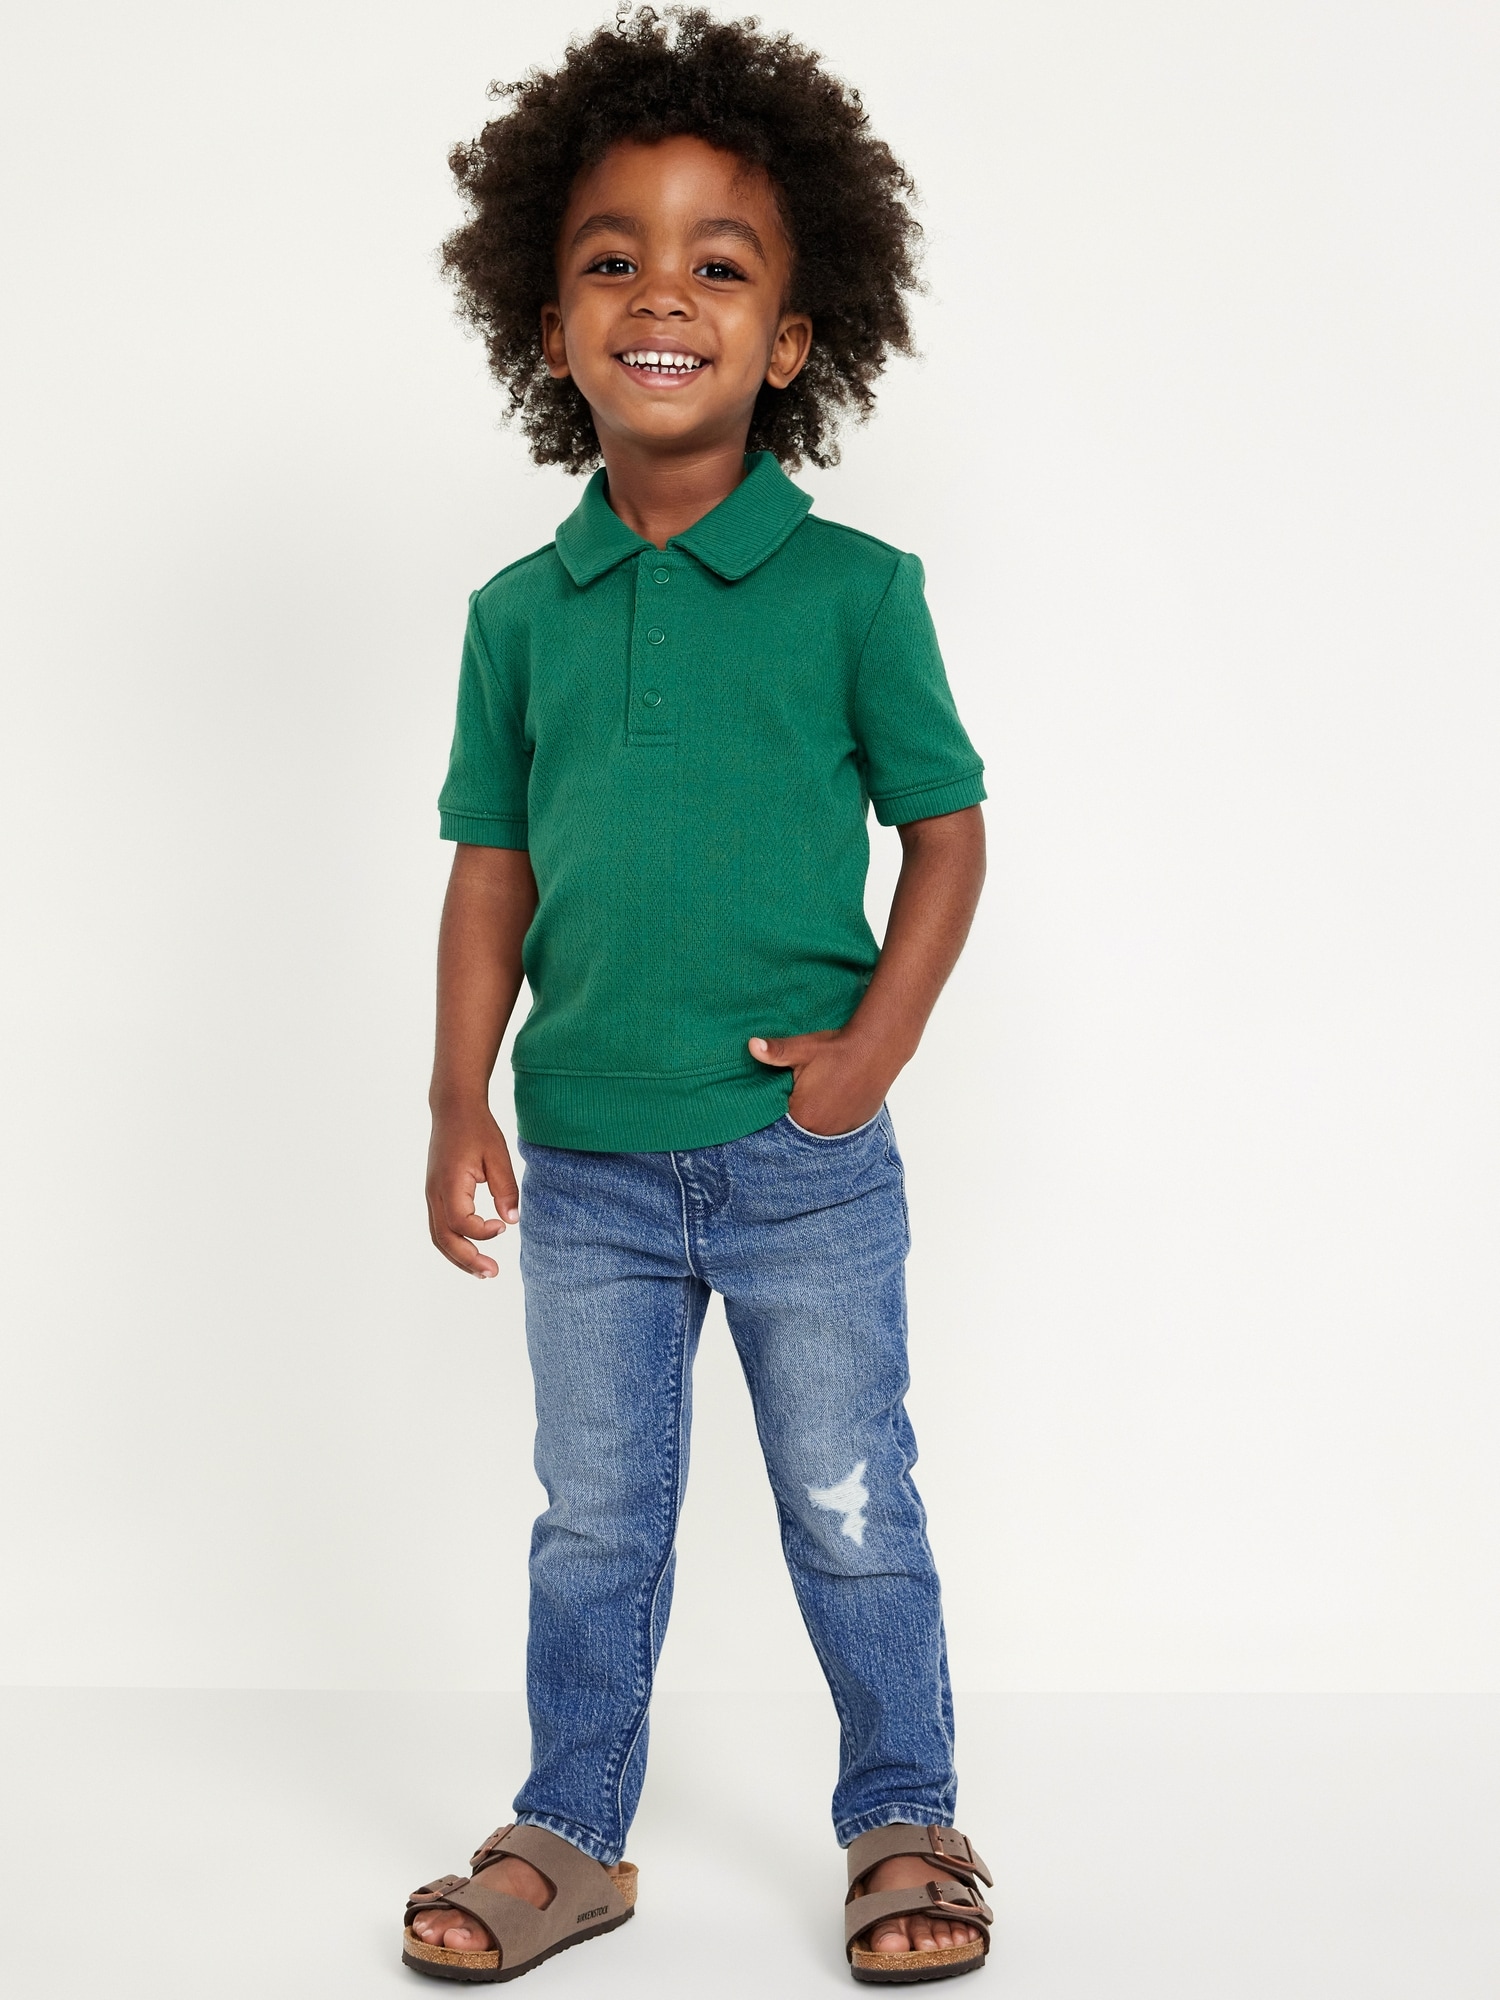 360° Stretch Pull-On Skinny Jeans for Toddler Boys